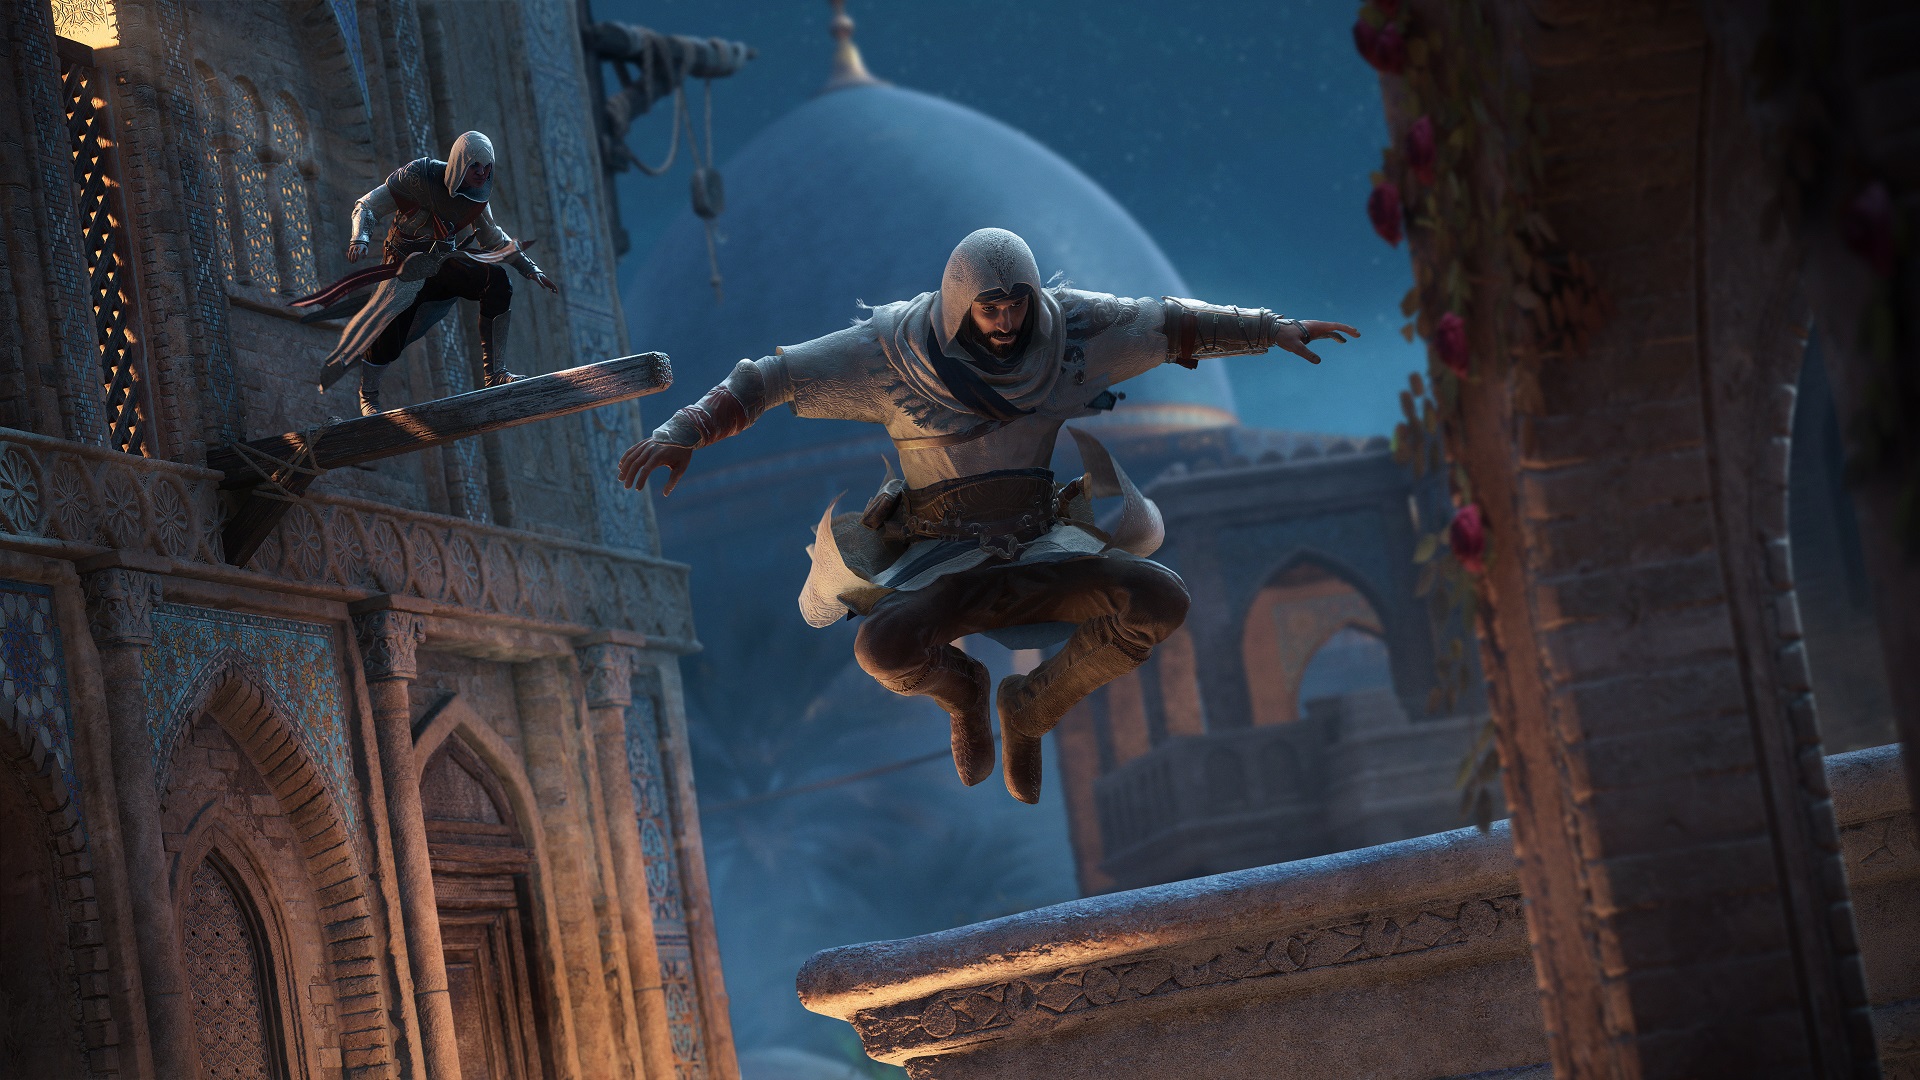 Assassin's Creed Mirage release times on PC and console